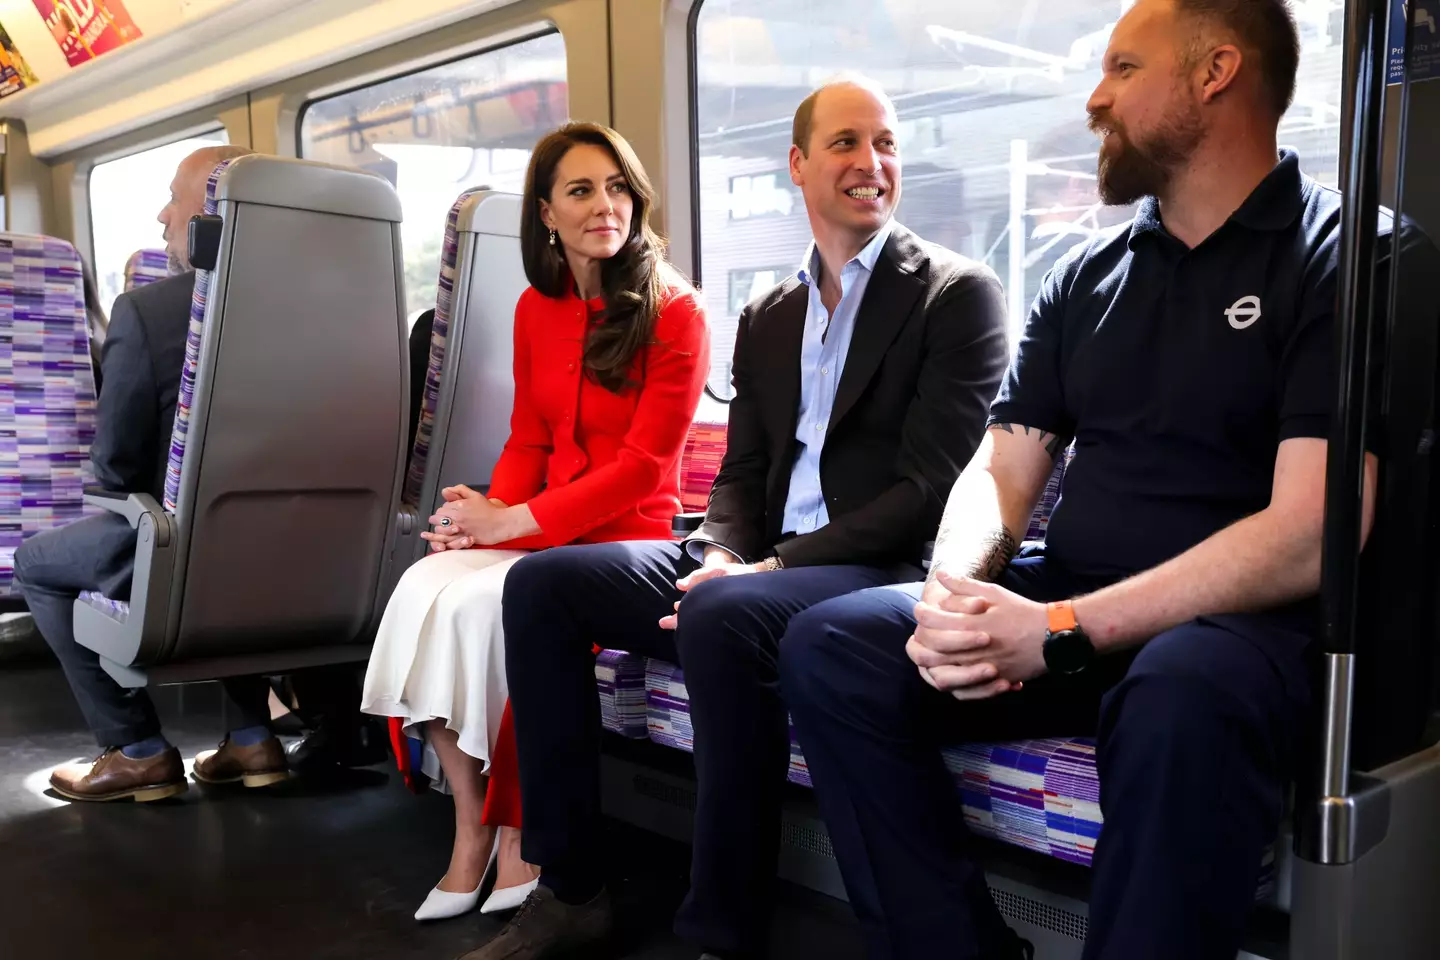 The trainspotter spoke with the Prince and Princess of Wales on the Lizzy line.